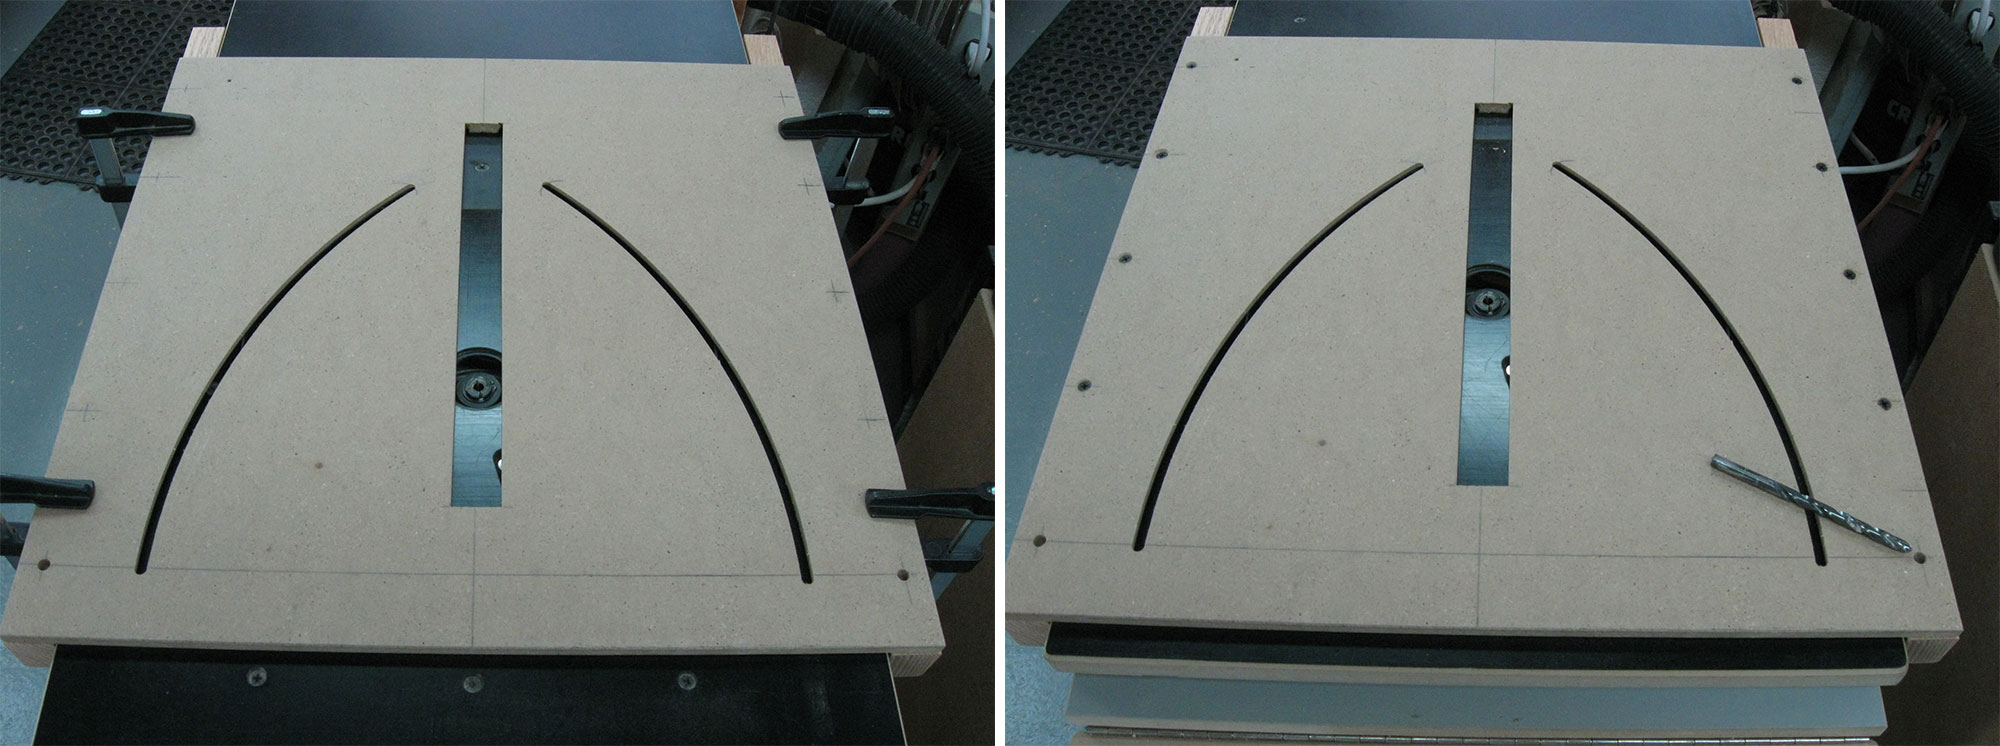 Left: Using the router table top to position the cleats. Right: Cleats secured with screws.